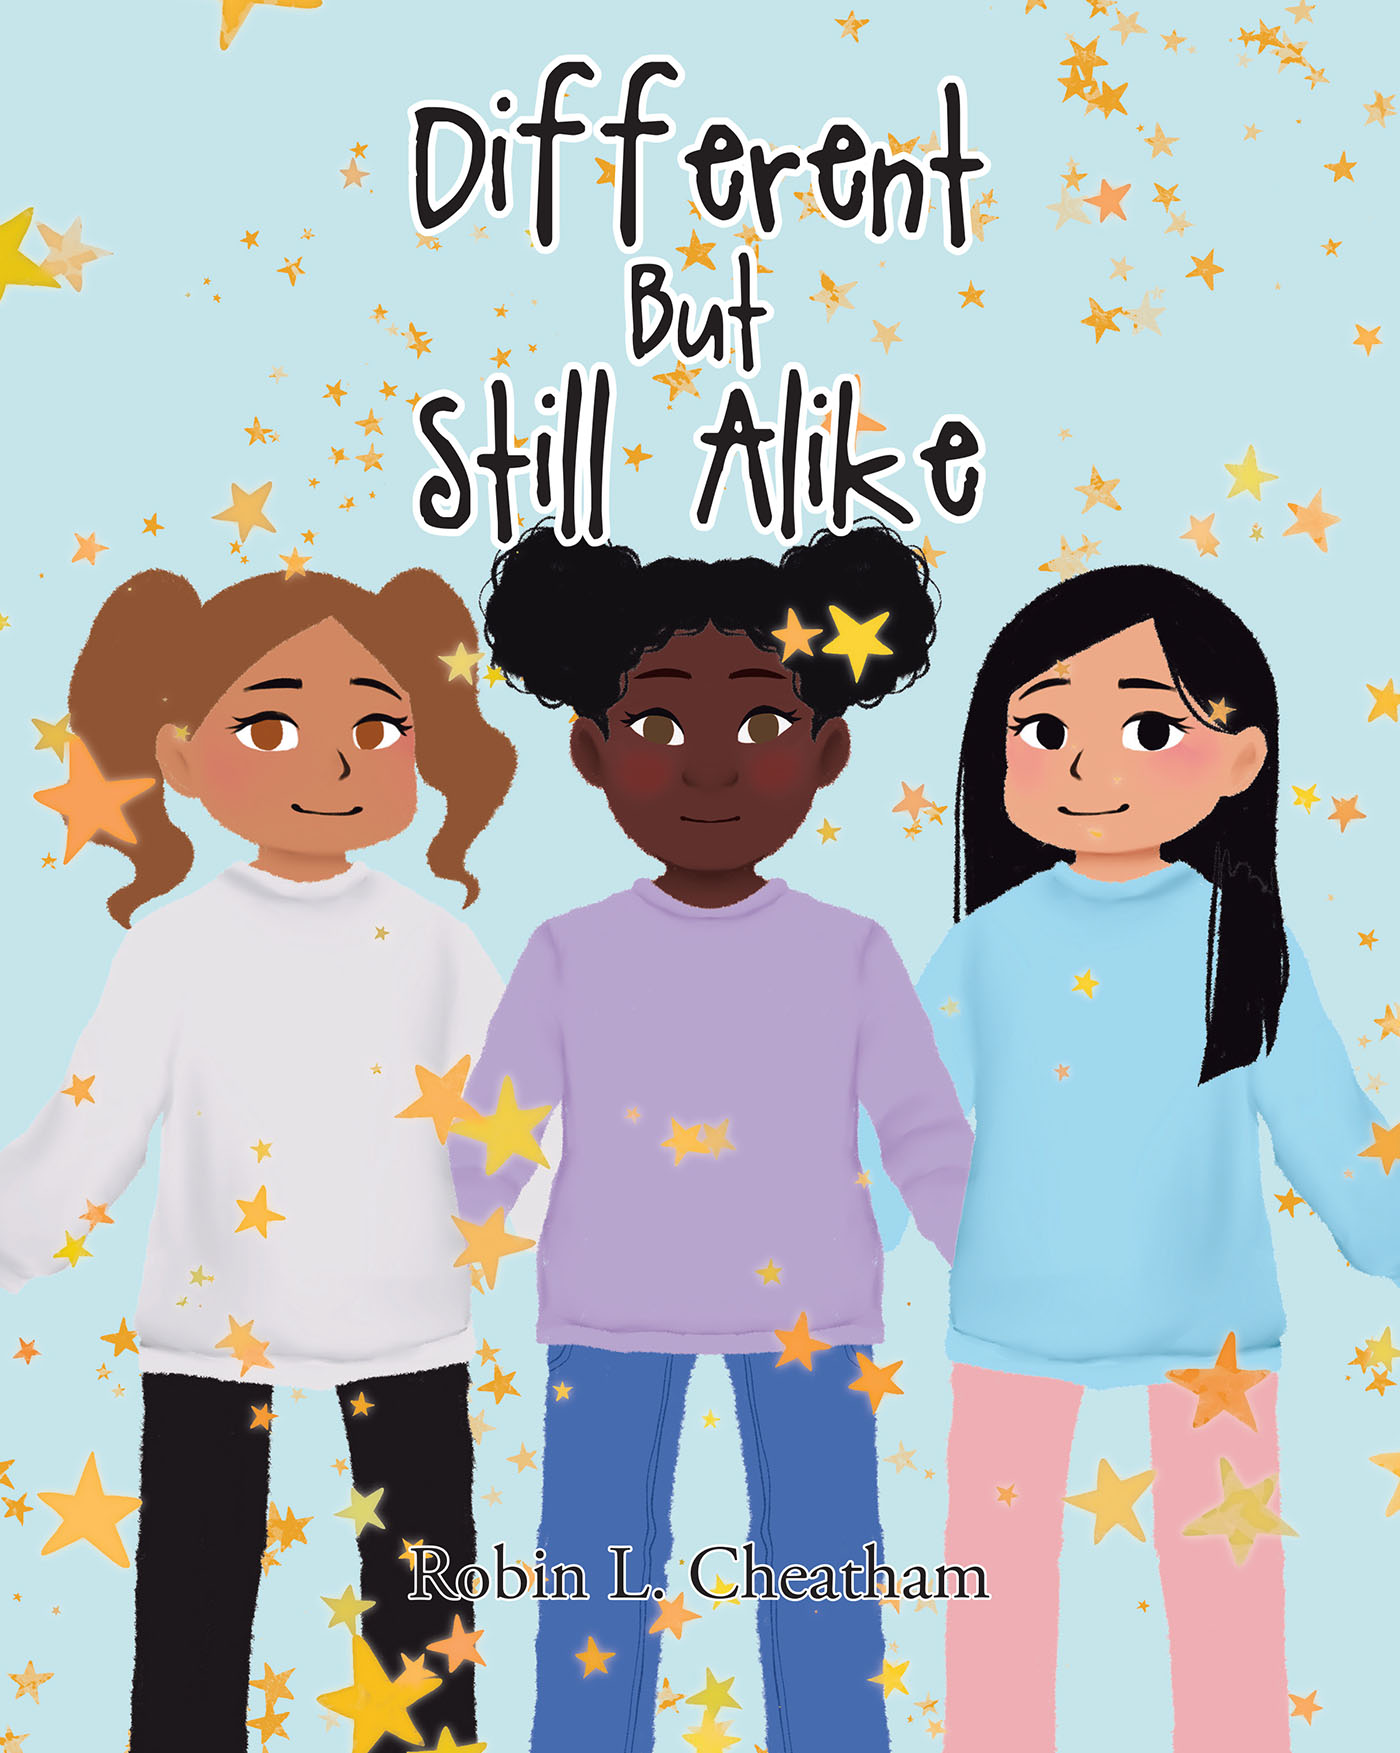 Robin L. Cheatham’s Newly Released "Different But Still Alike" is an Intelligent Narrative That Explores the Complexities of Cultural Biases